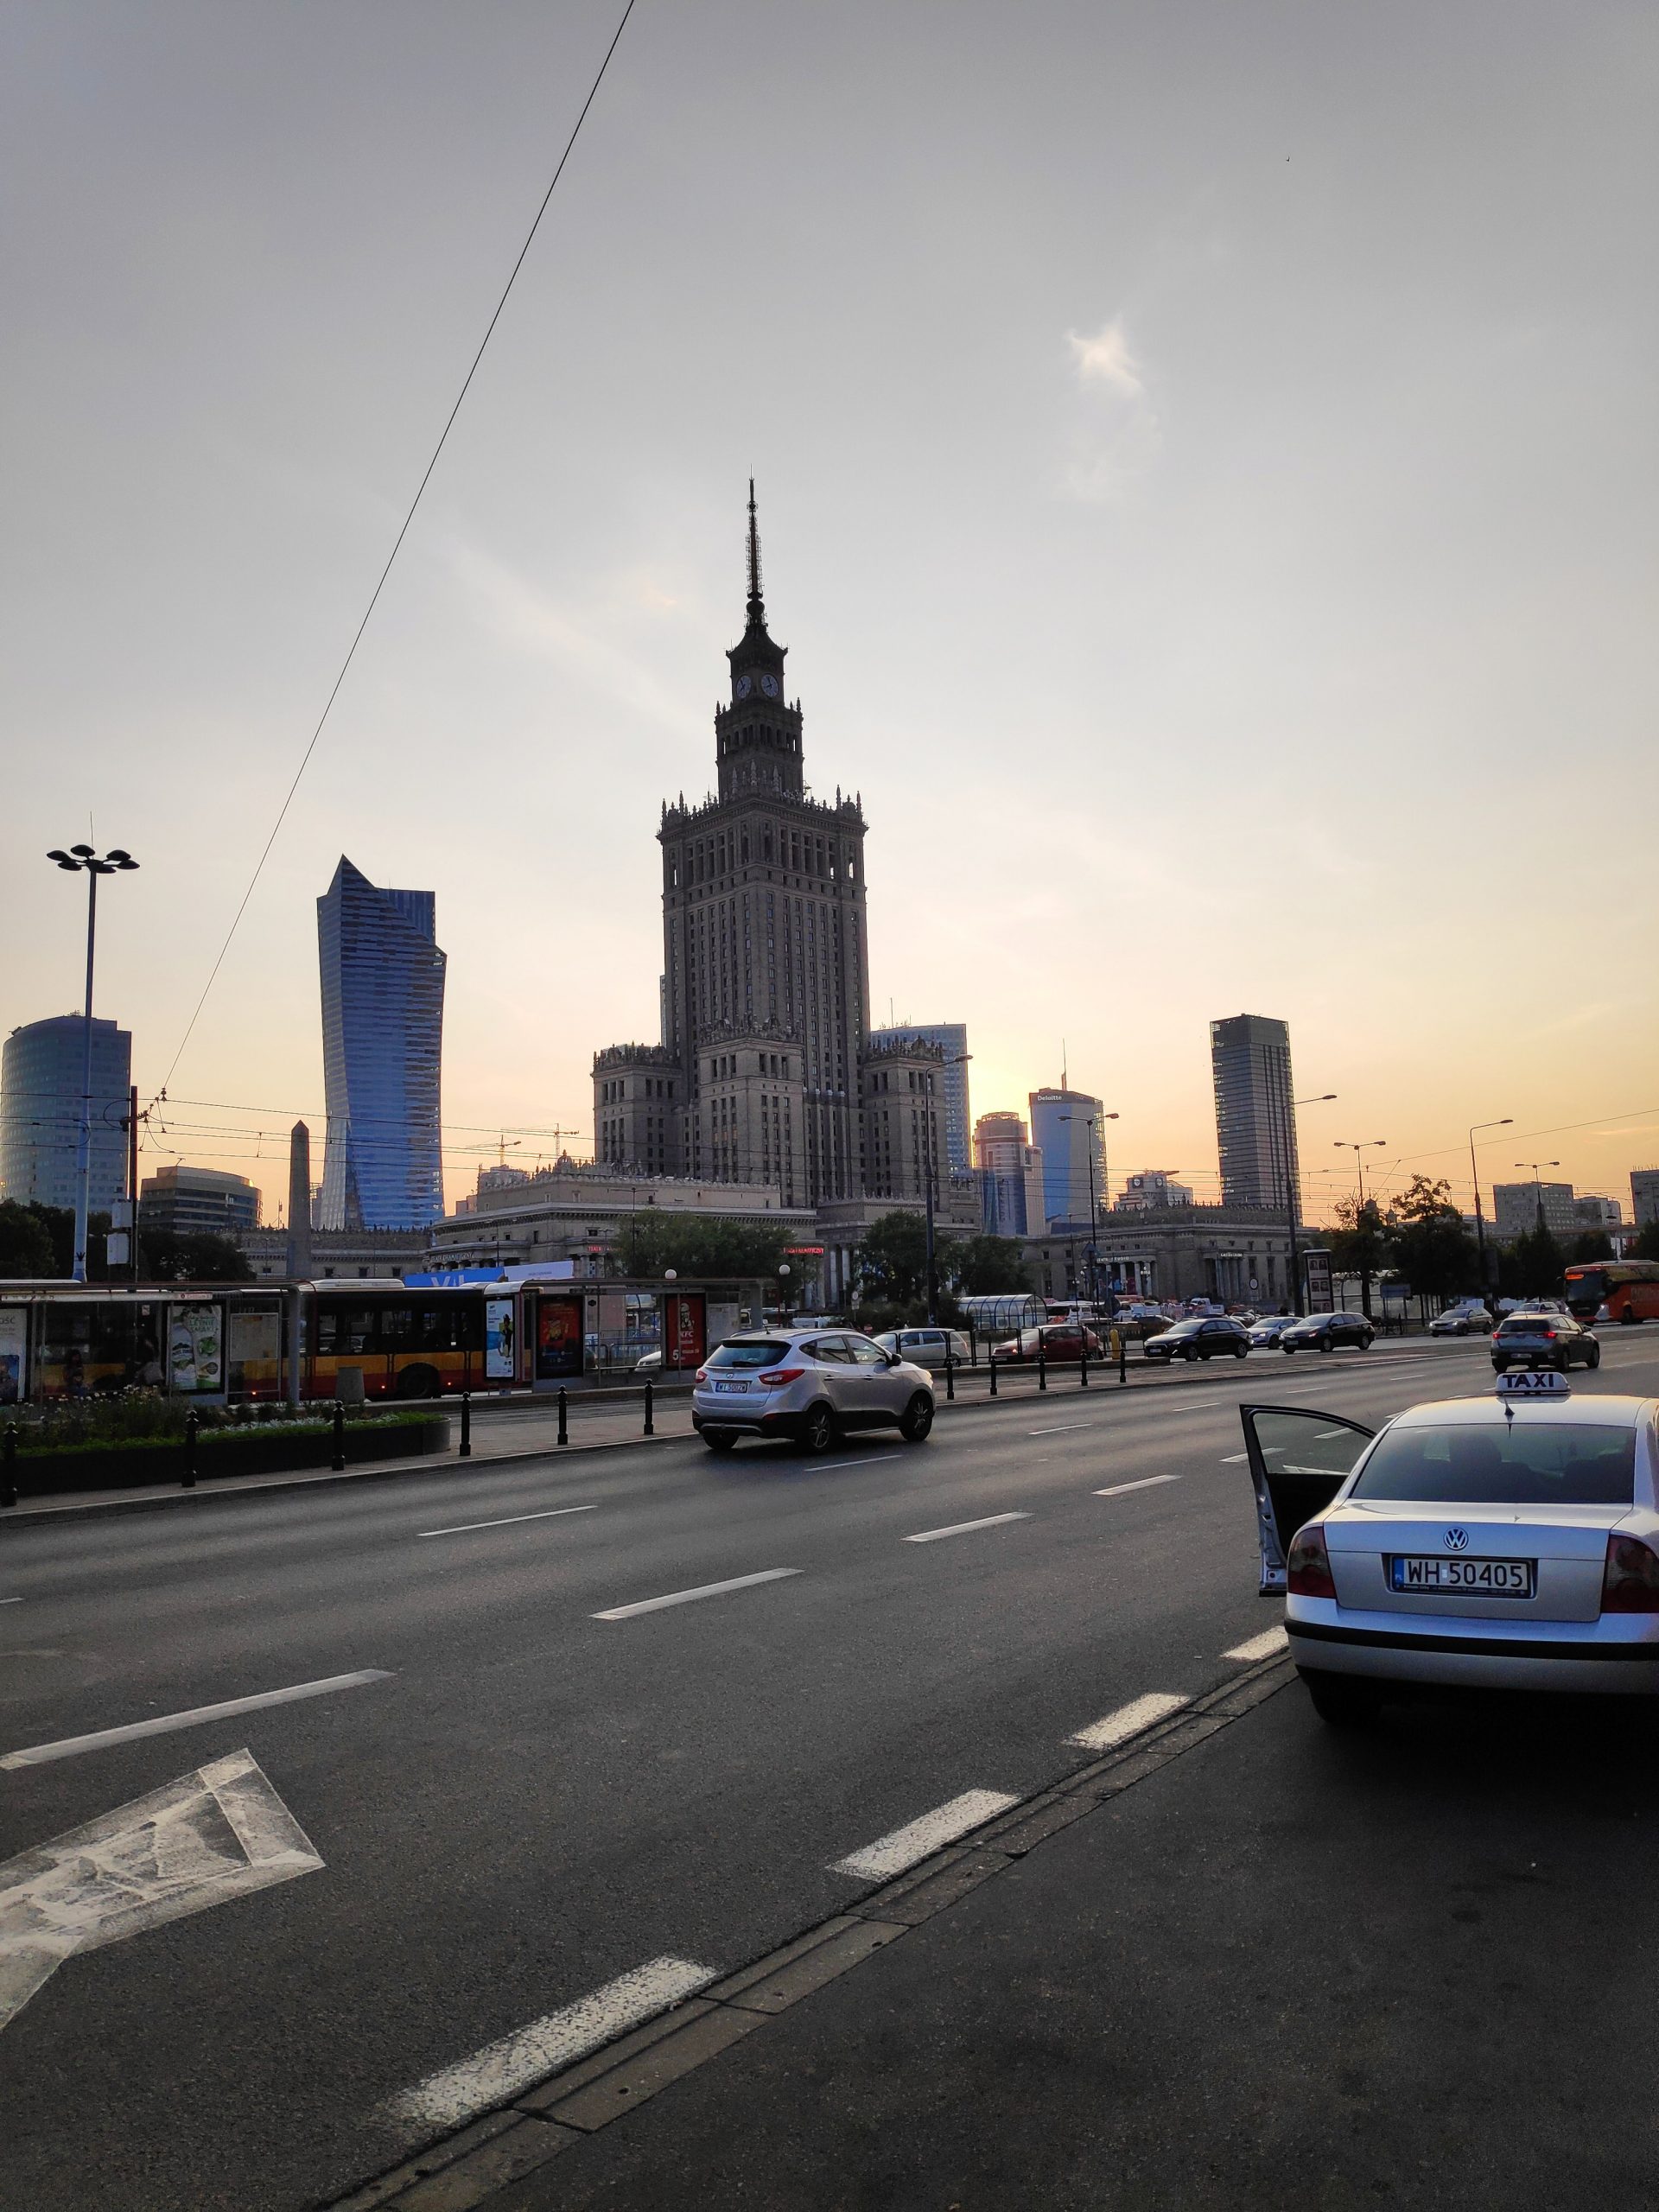 The tallest building in Warsaw.